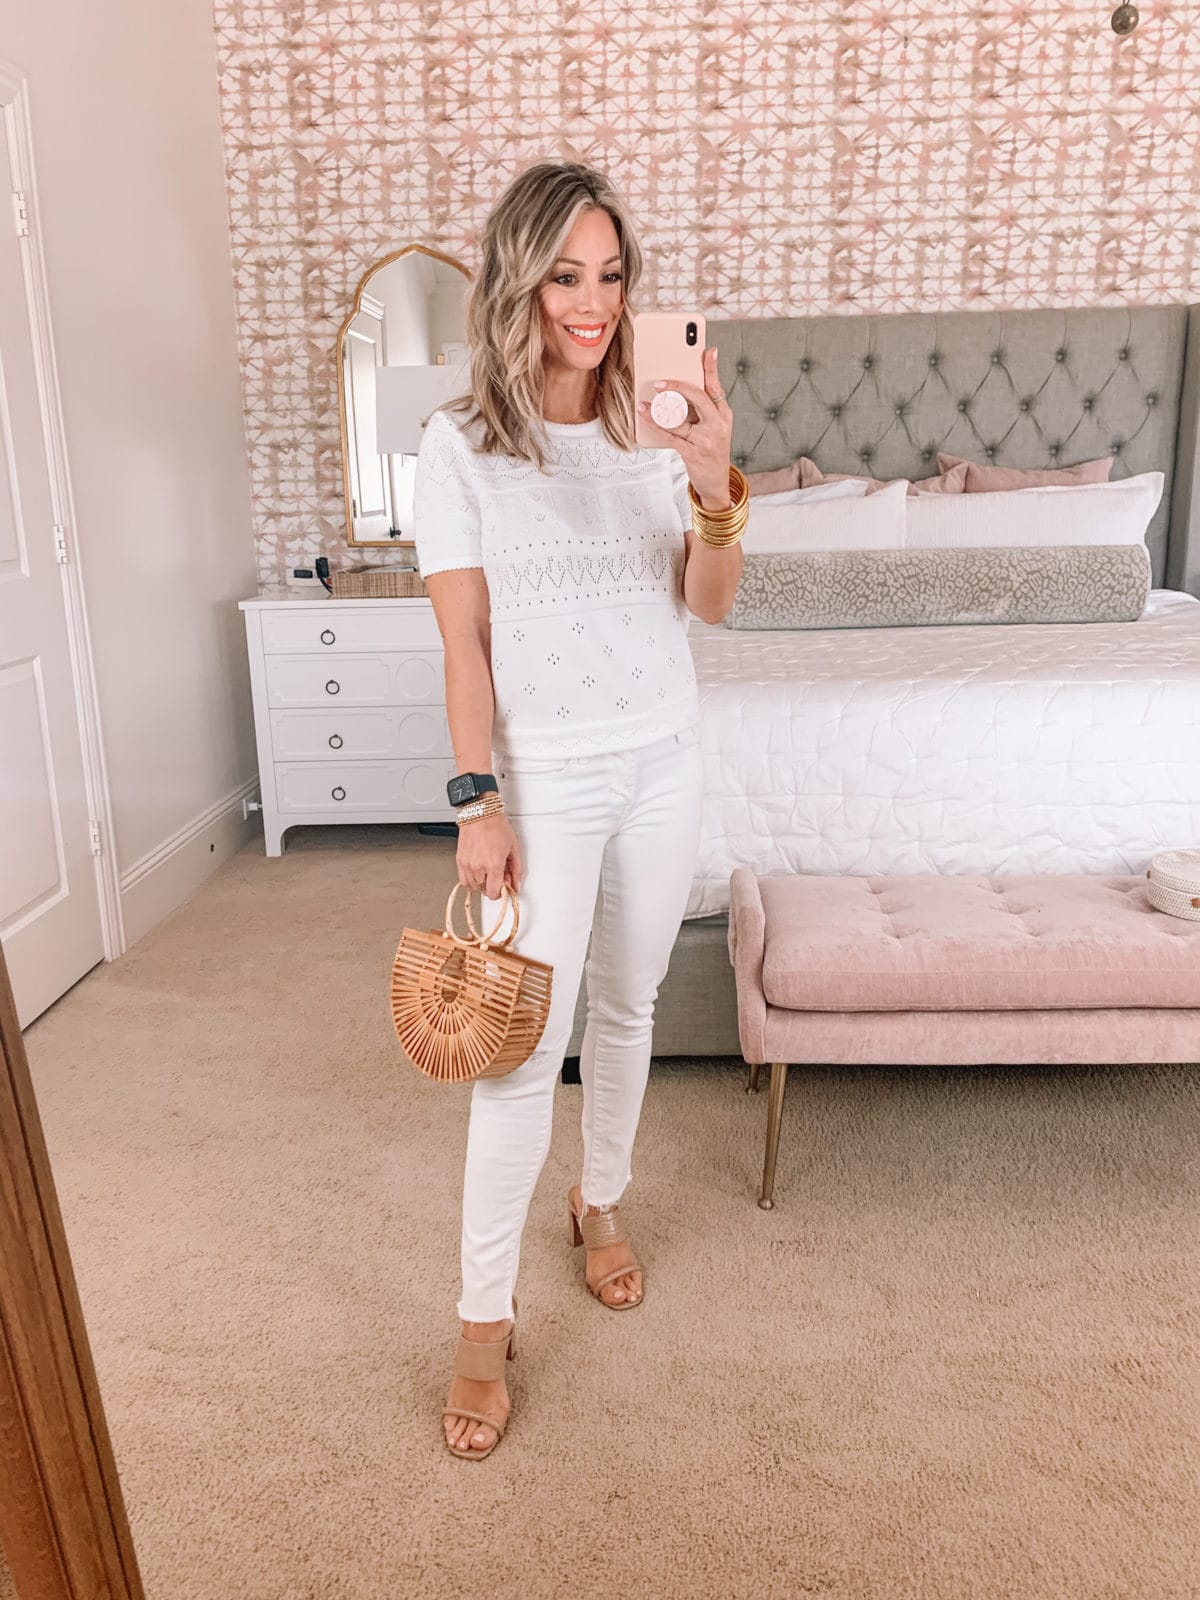 Amazon Fashion Faves, White Embroidered Top, White Jeans, Sandals, Bamboo Clutch